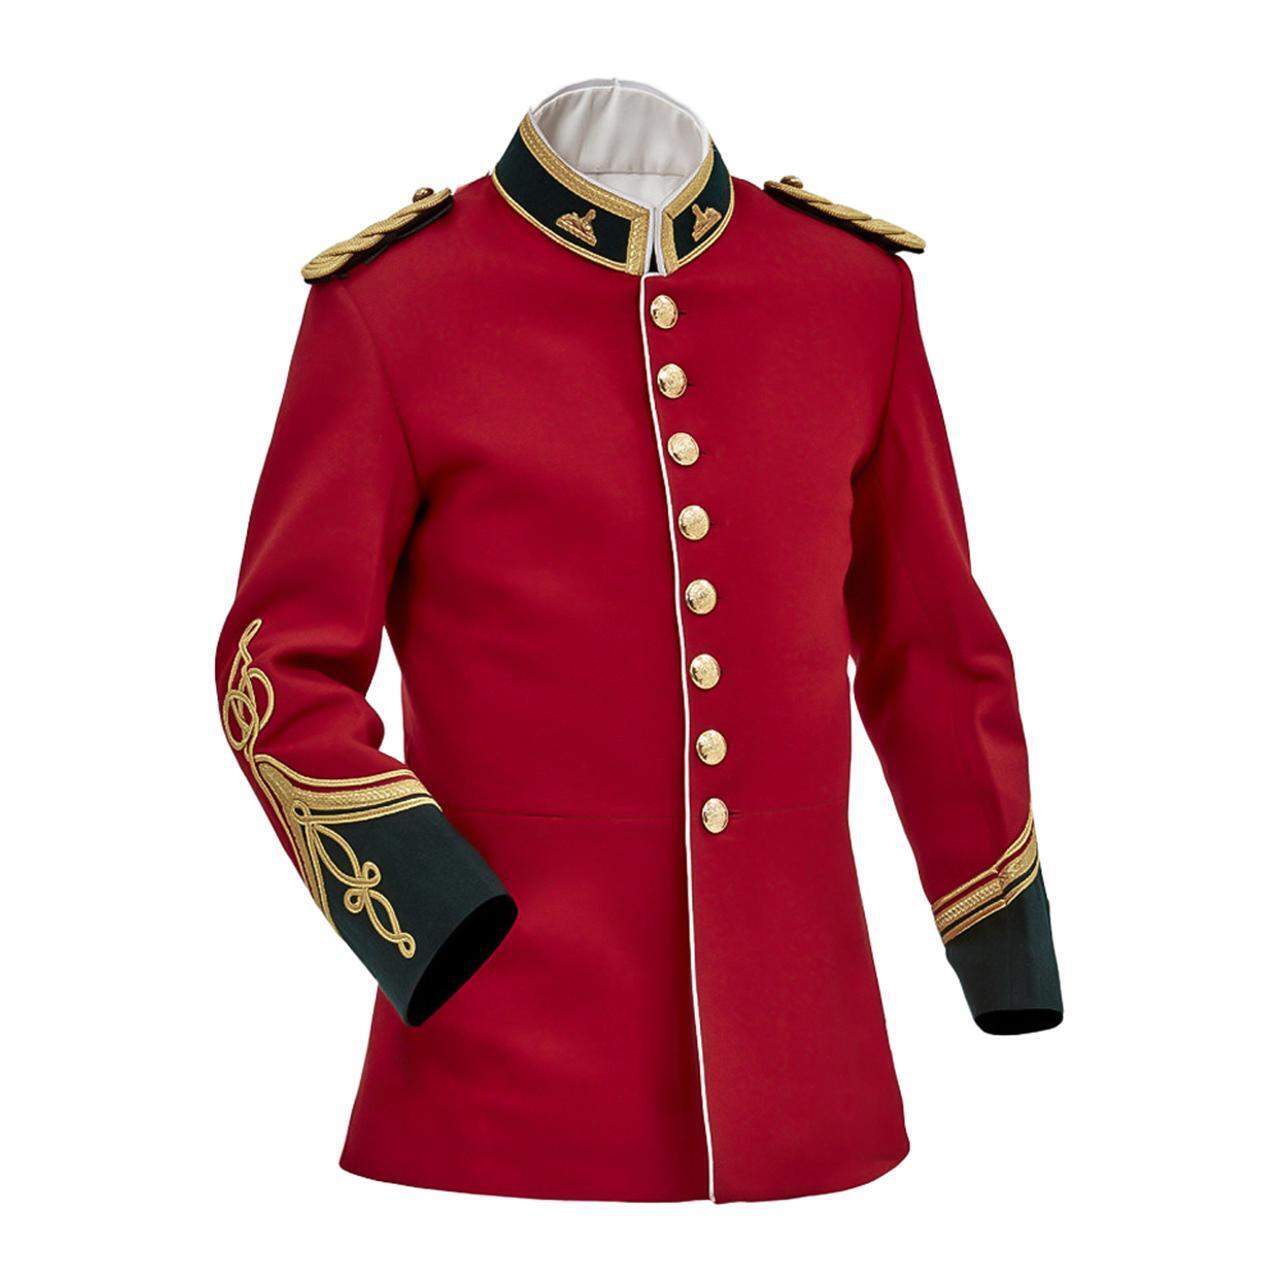 1879 Red Zulu War Jacket British Military Officers Tunic Anglo Circa Jacket